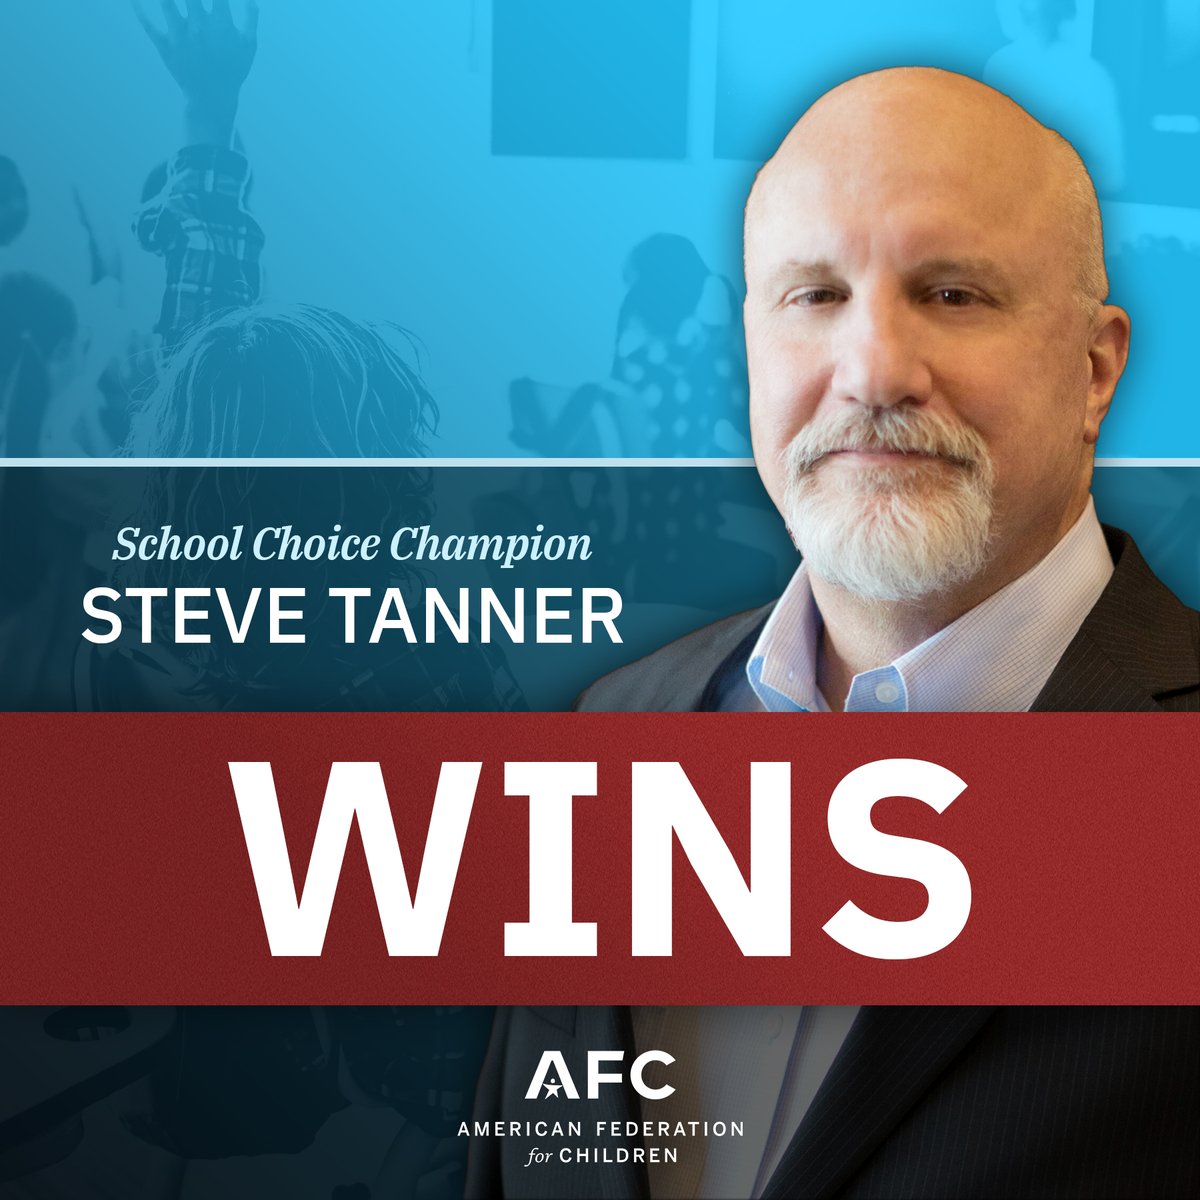 Congratulations to school choice champion Steve Tanner for his primary victory in Idaho!